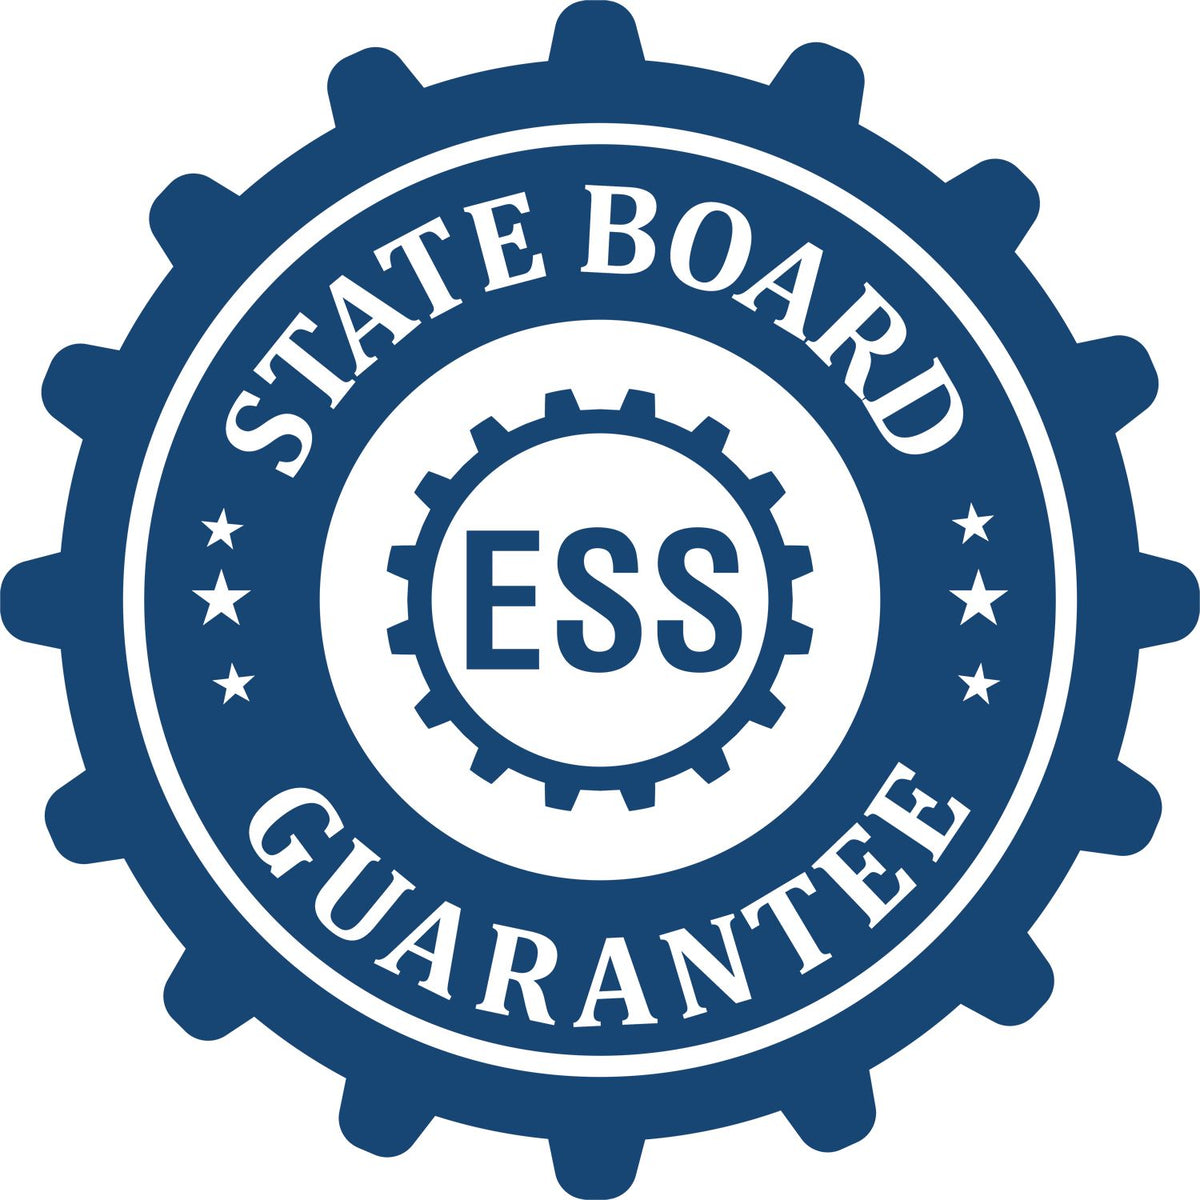 An emblem in a gear shape illustrating a state board guarantee for the Extended Long Reach Delaware Surveyor Embosser product.